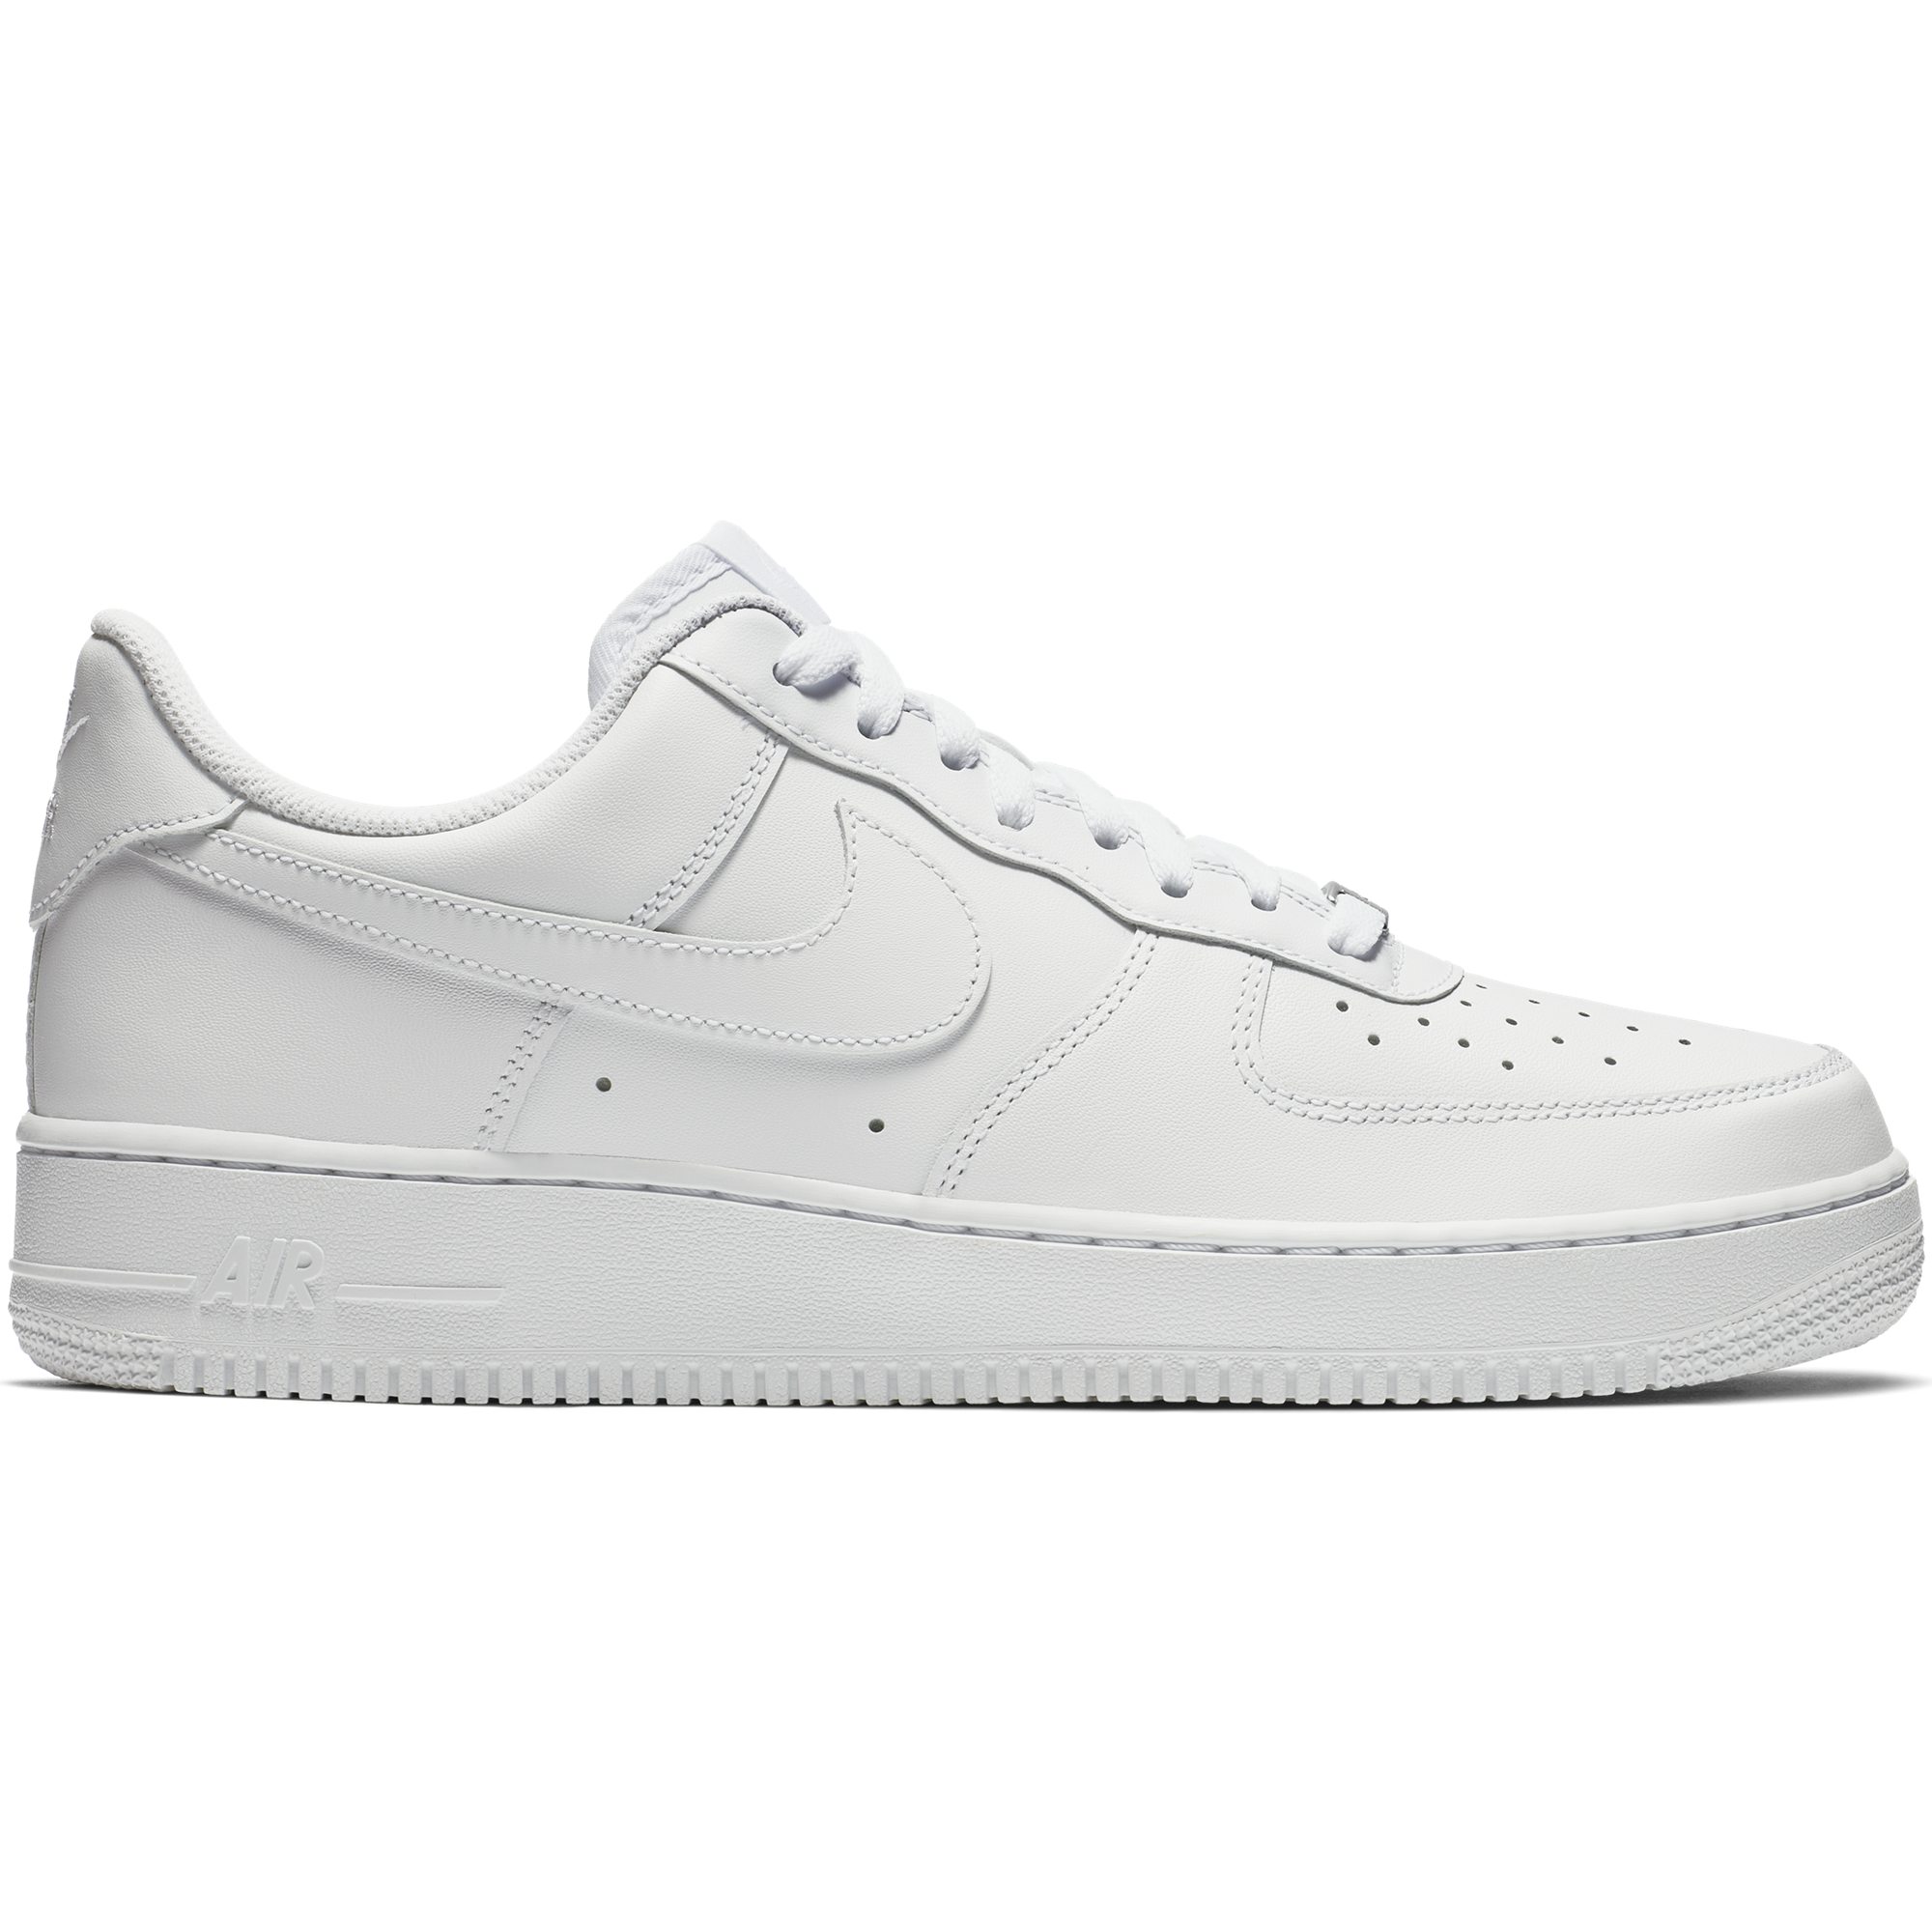 Кроссовки air force. Nike Air Force 1 07. Nike Air Force 1 Low White. Nike Air Force 1 314192-117. Nike Air Force 1 White.